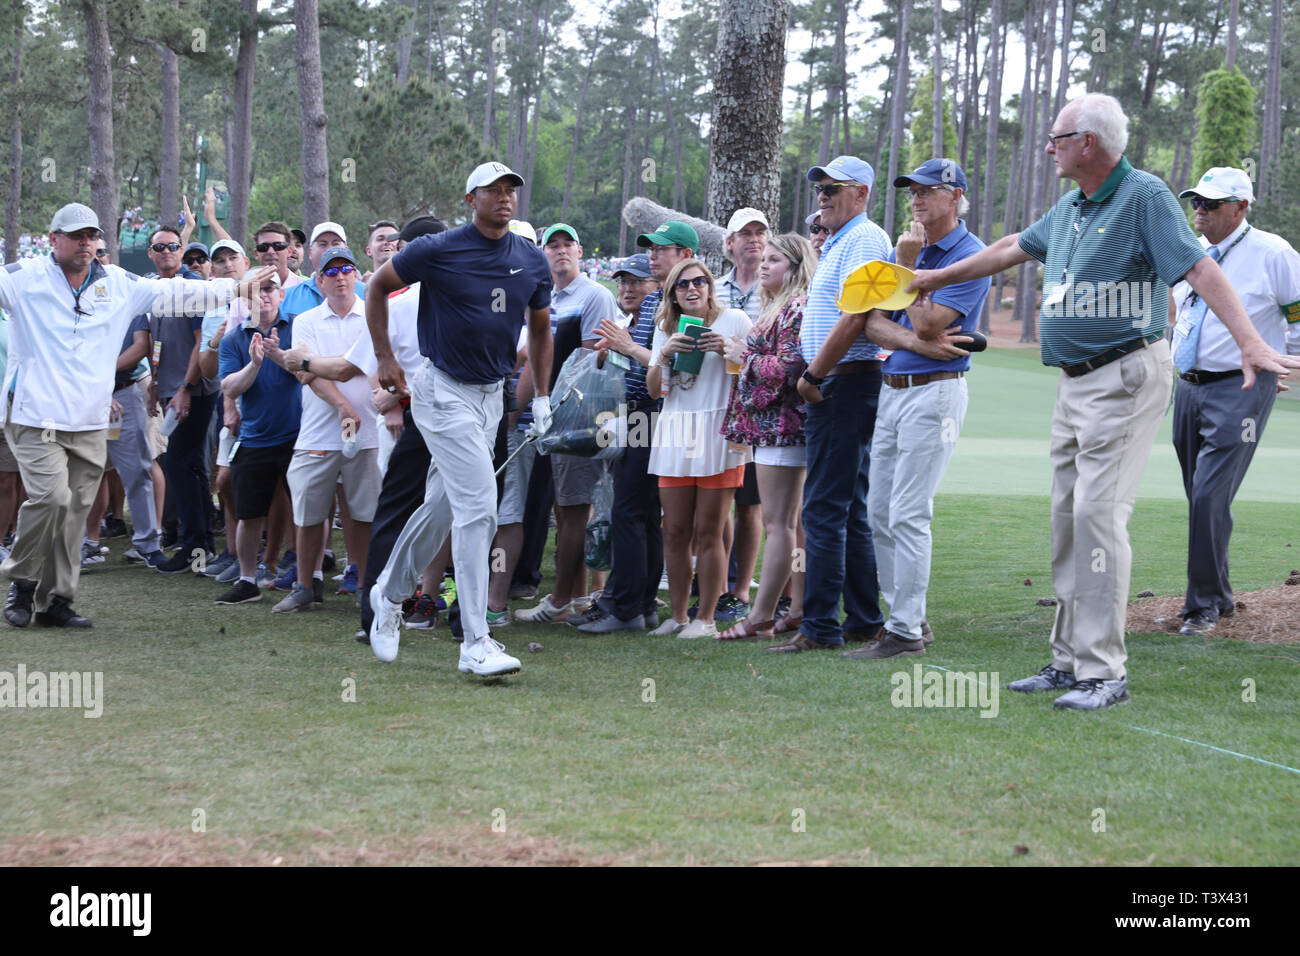 United States Tiger Woods walks on the 17th hole during the first round of the 2019 Masters golf tournament at the Augusta National Golf Club in Augusta, Georgia, United States, on April